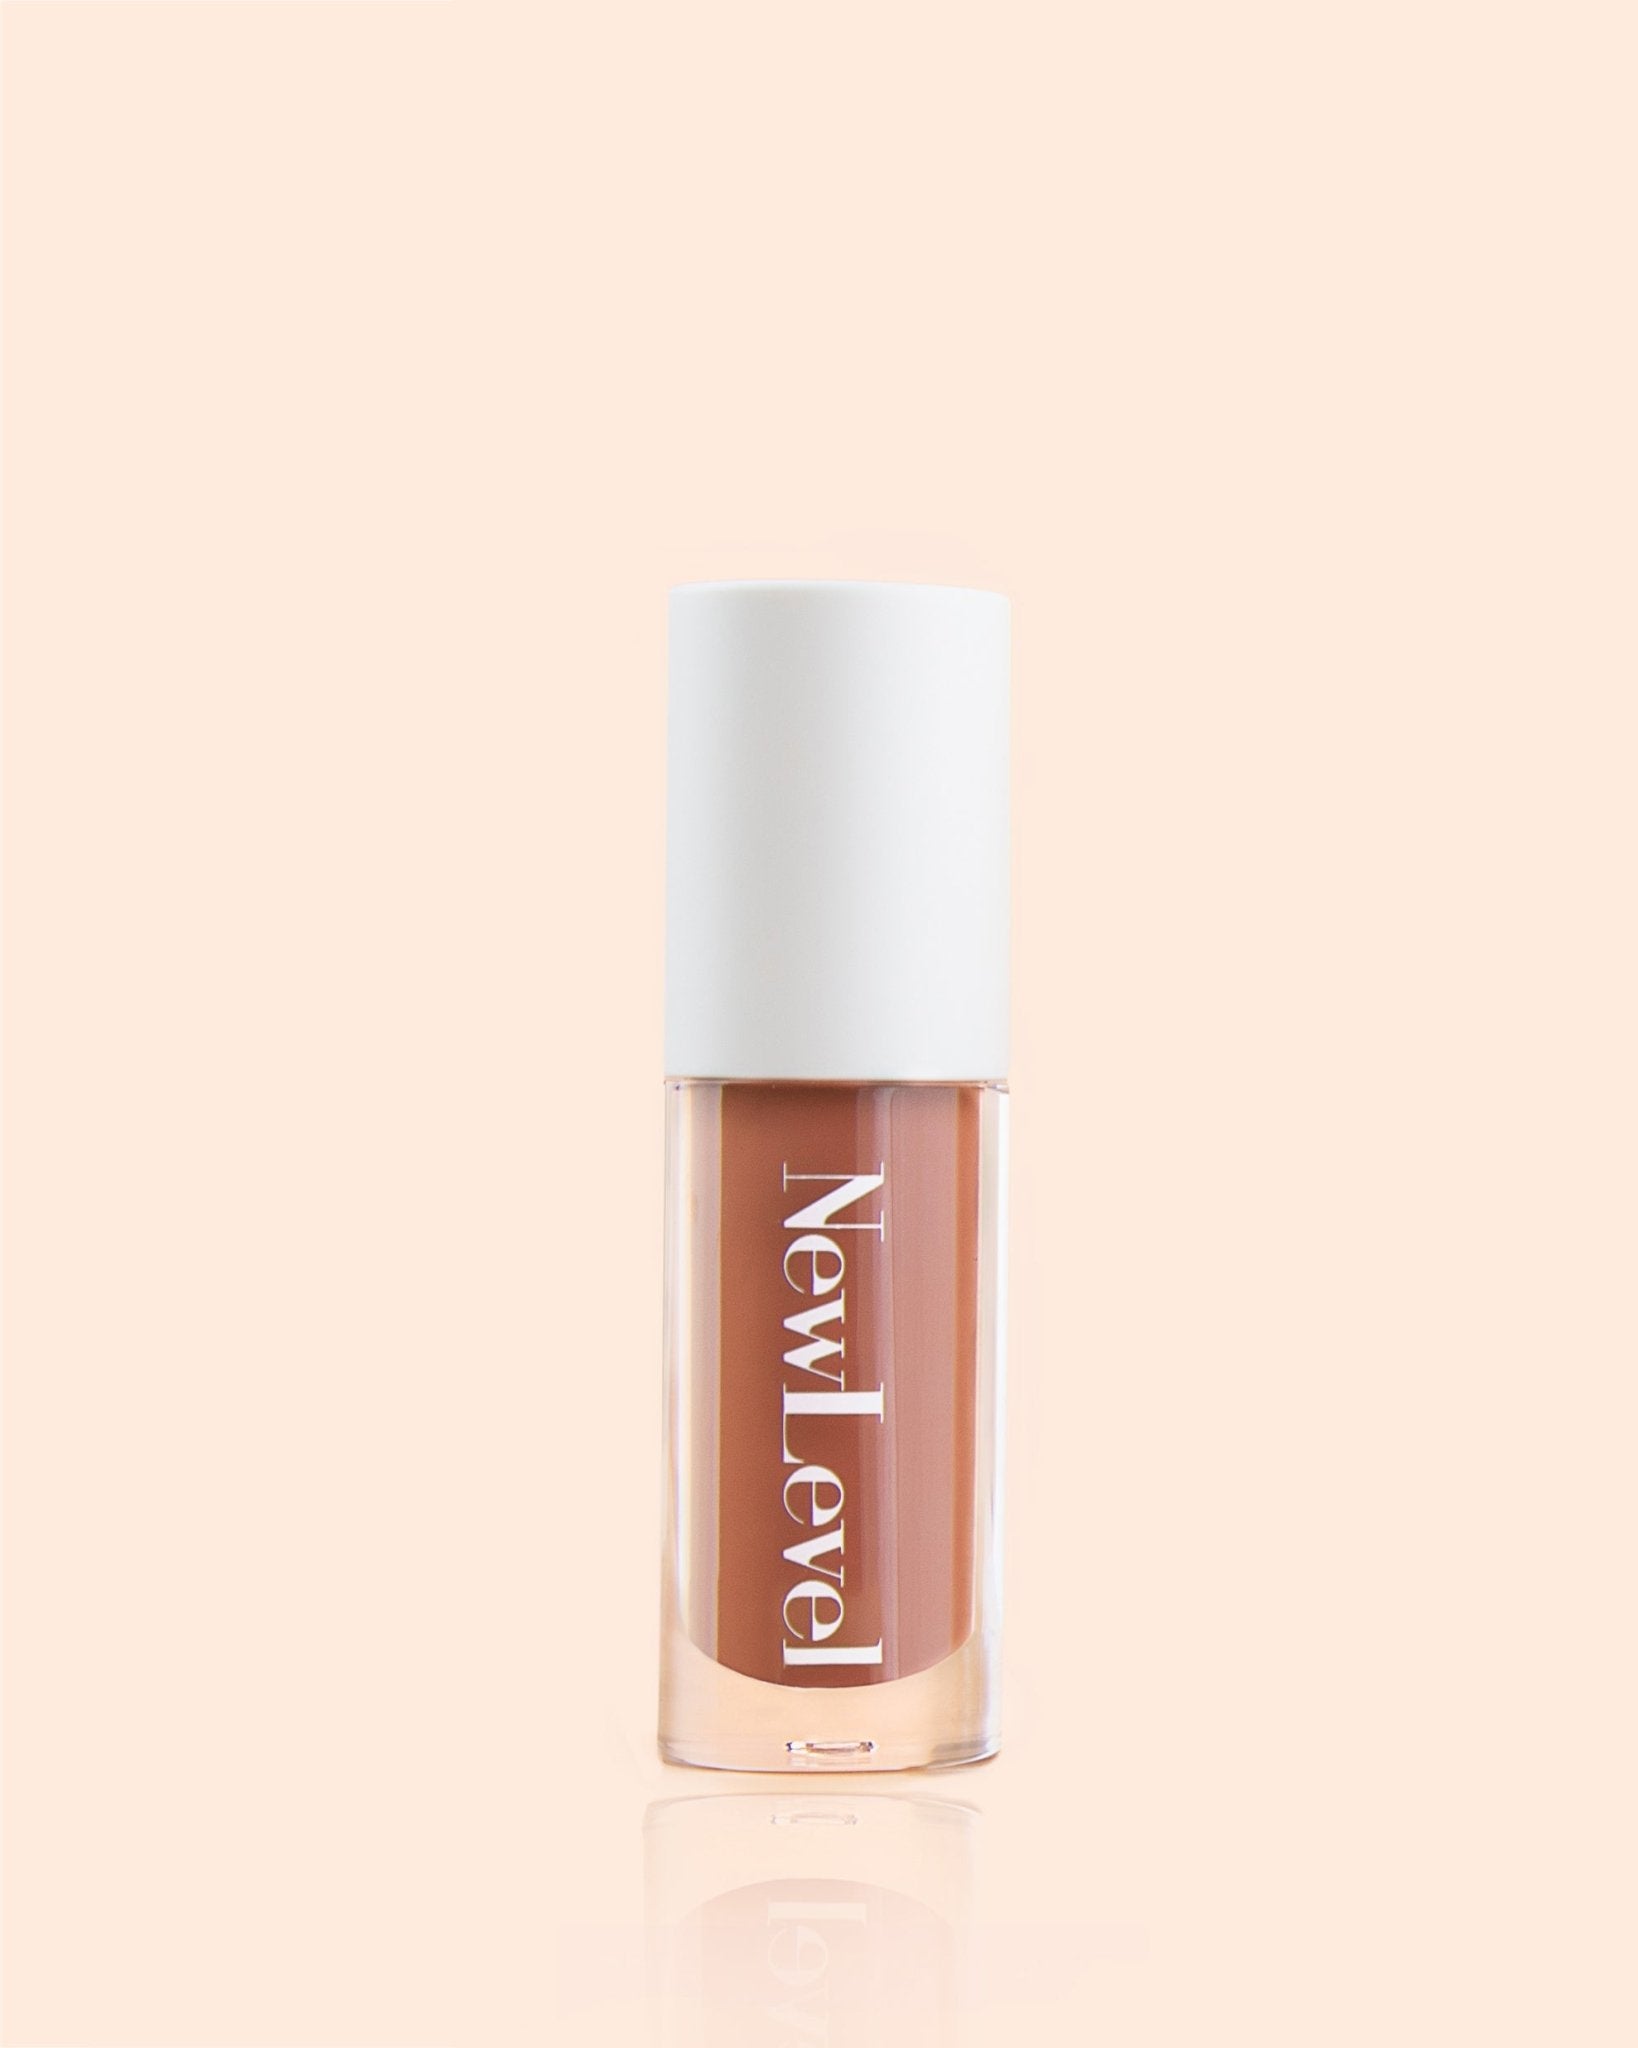 Sneaky Link Chocolate Butter Lipgloss - New Level